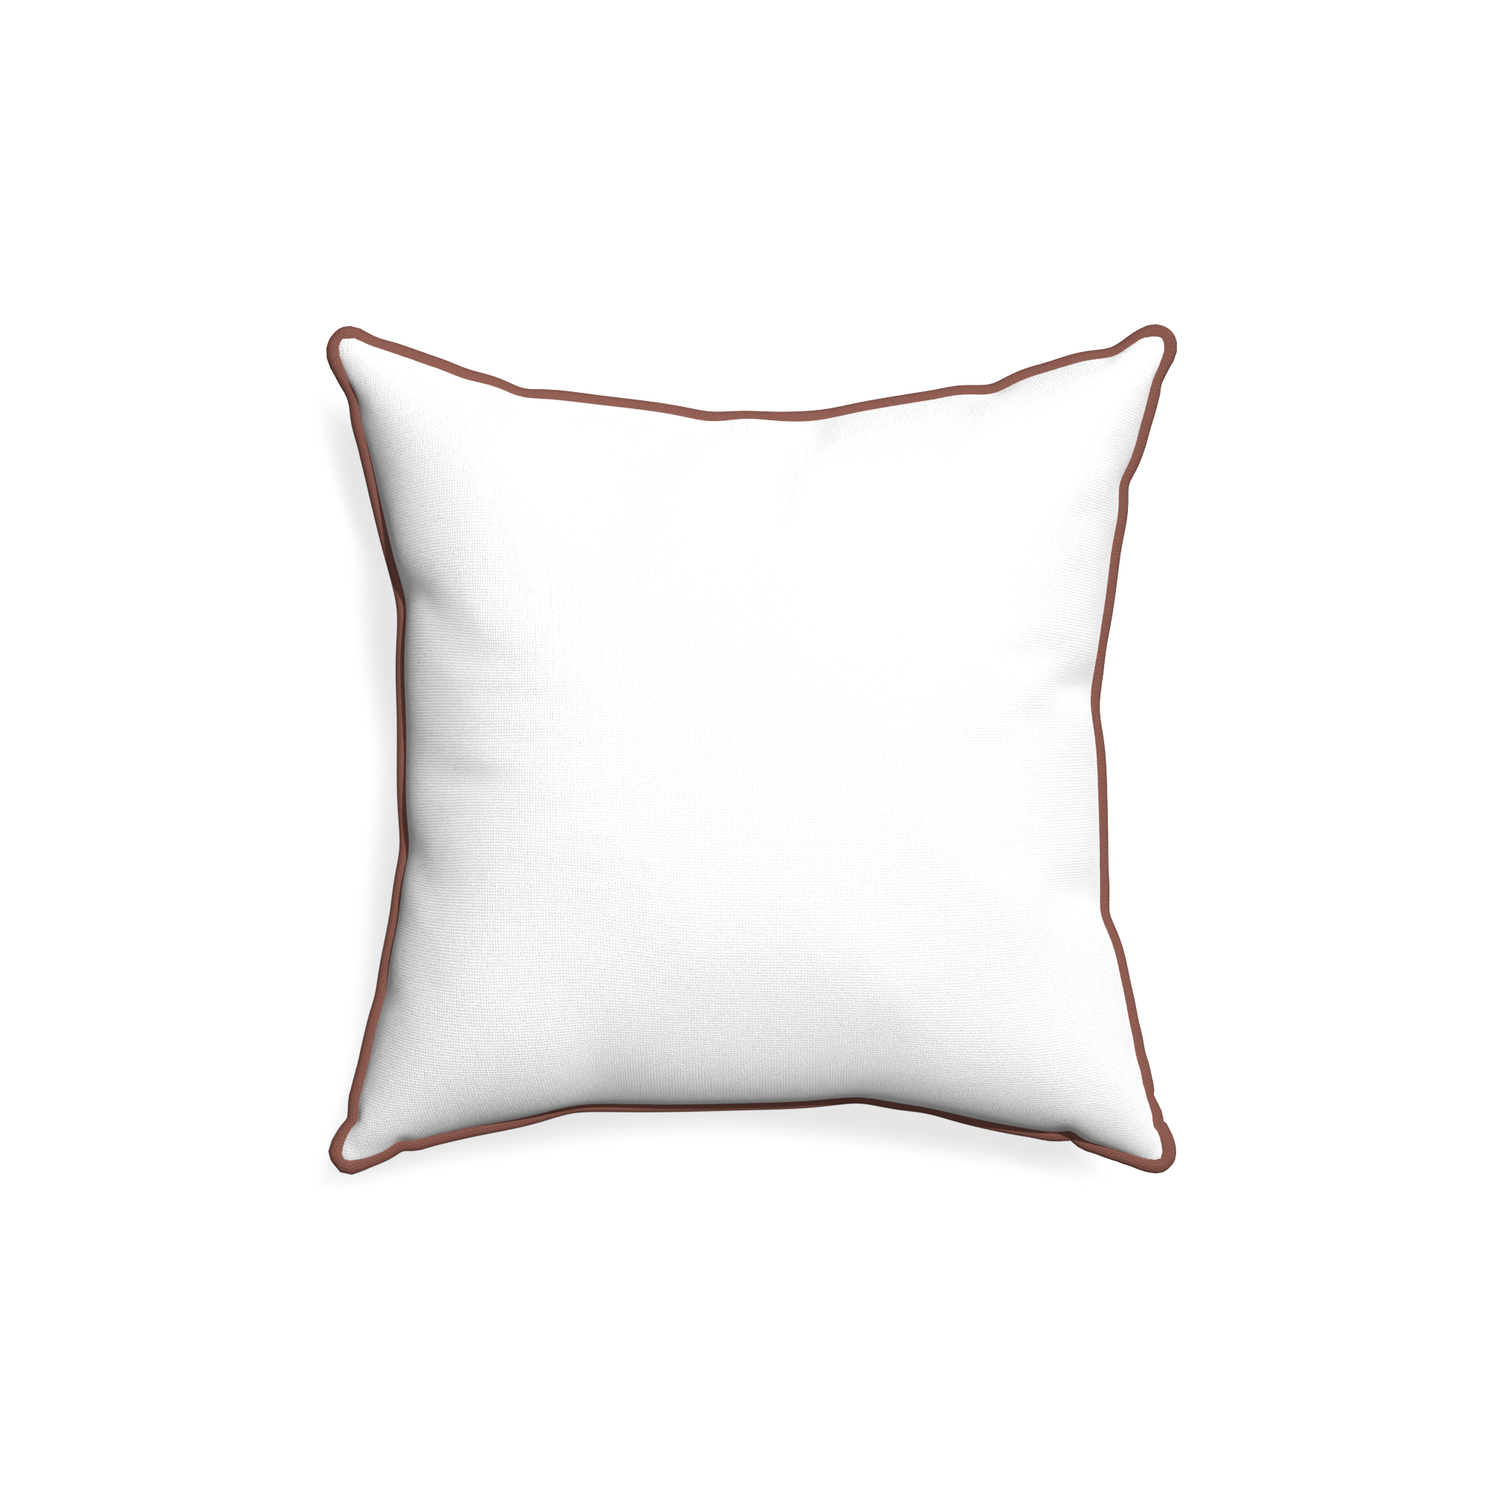 18-square snow custom pillow with w piping on white background